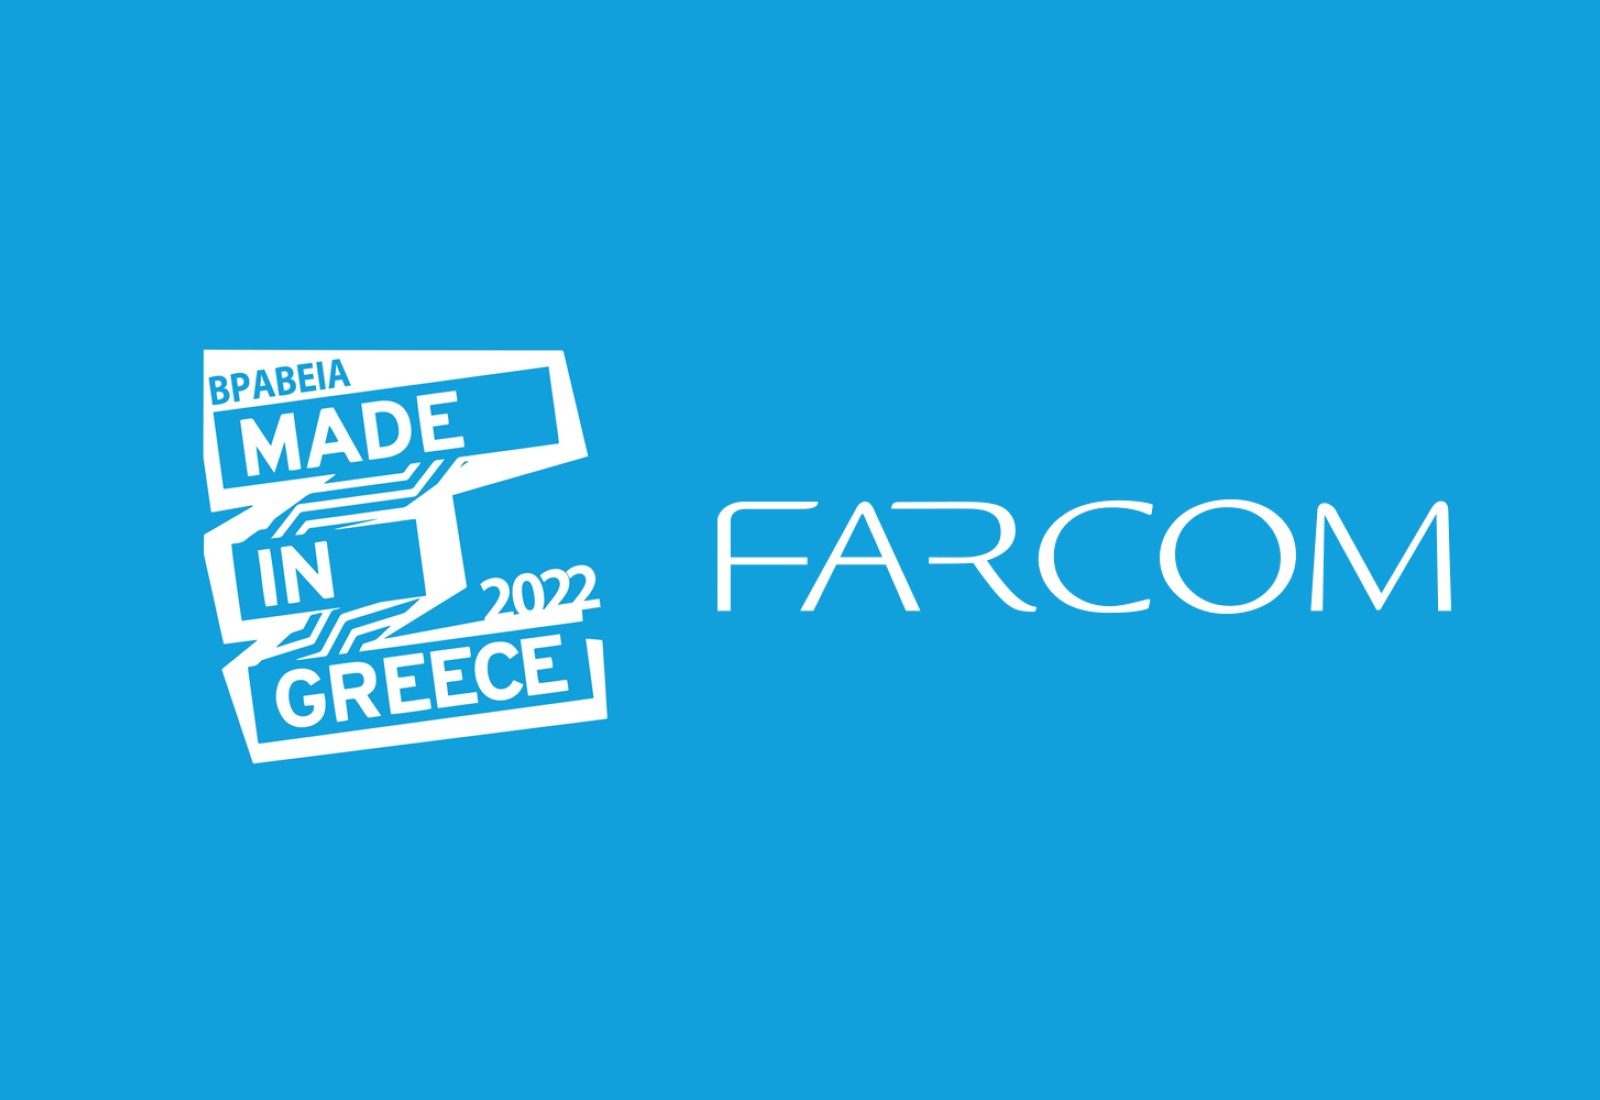 New awards for FARCOM at ‘Made in Greece Awards 2022’